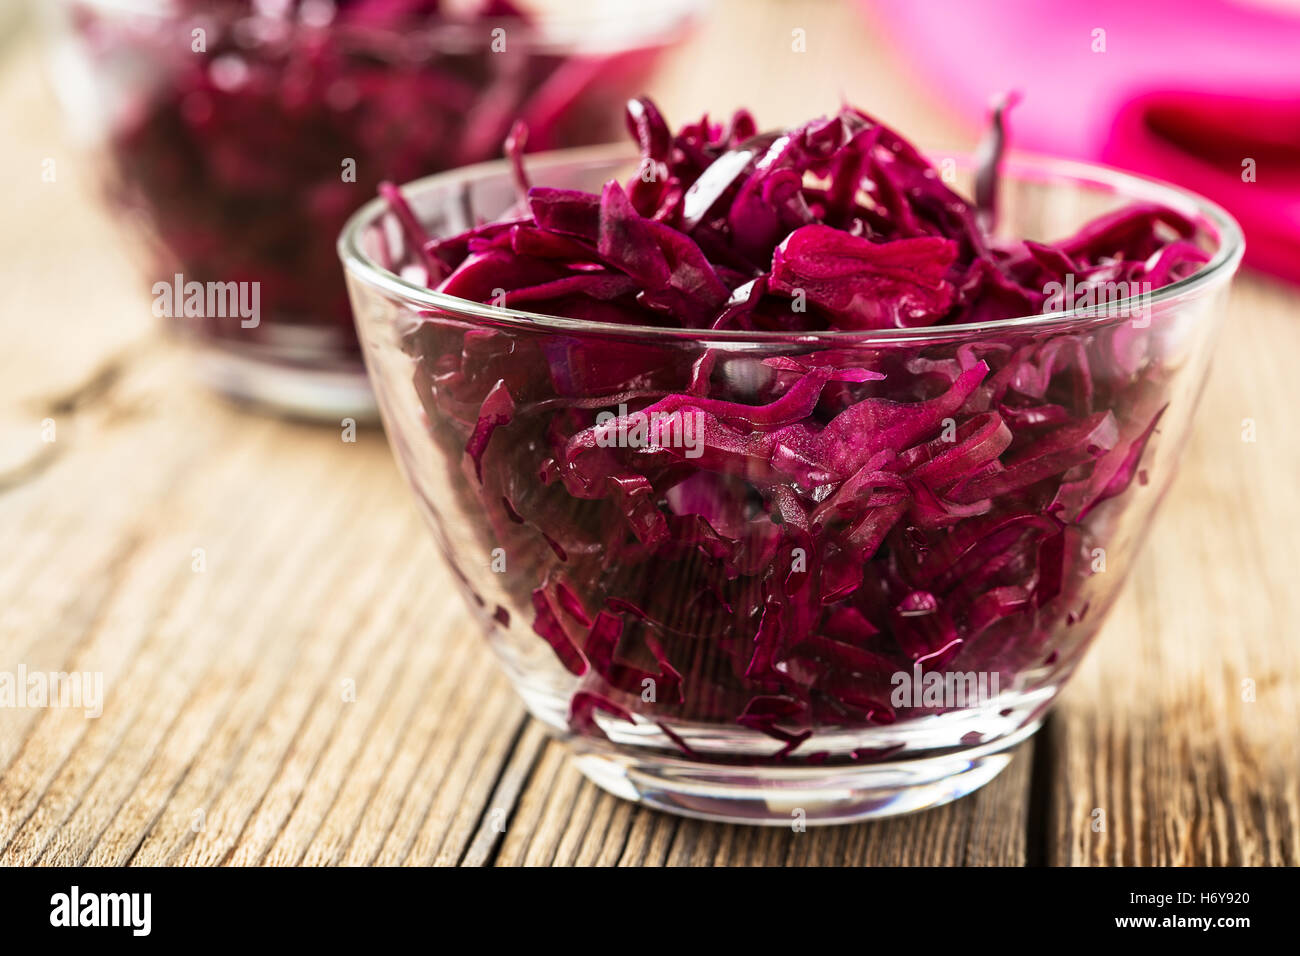 Healthy red coleslaw on wooden background Stock Photo